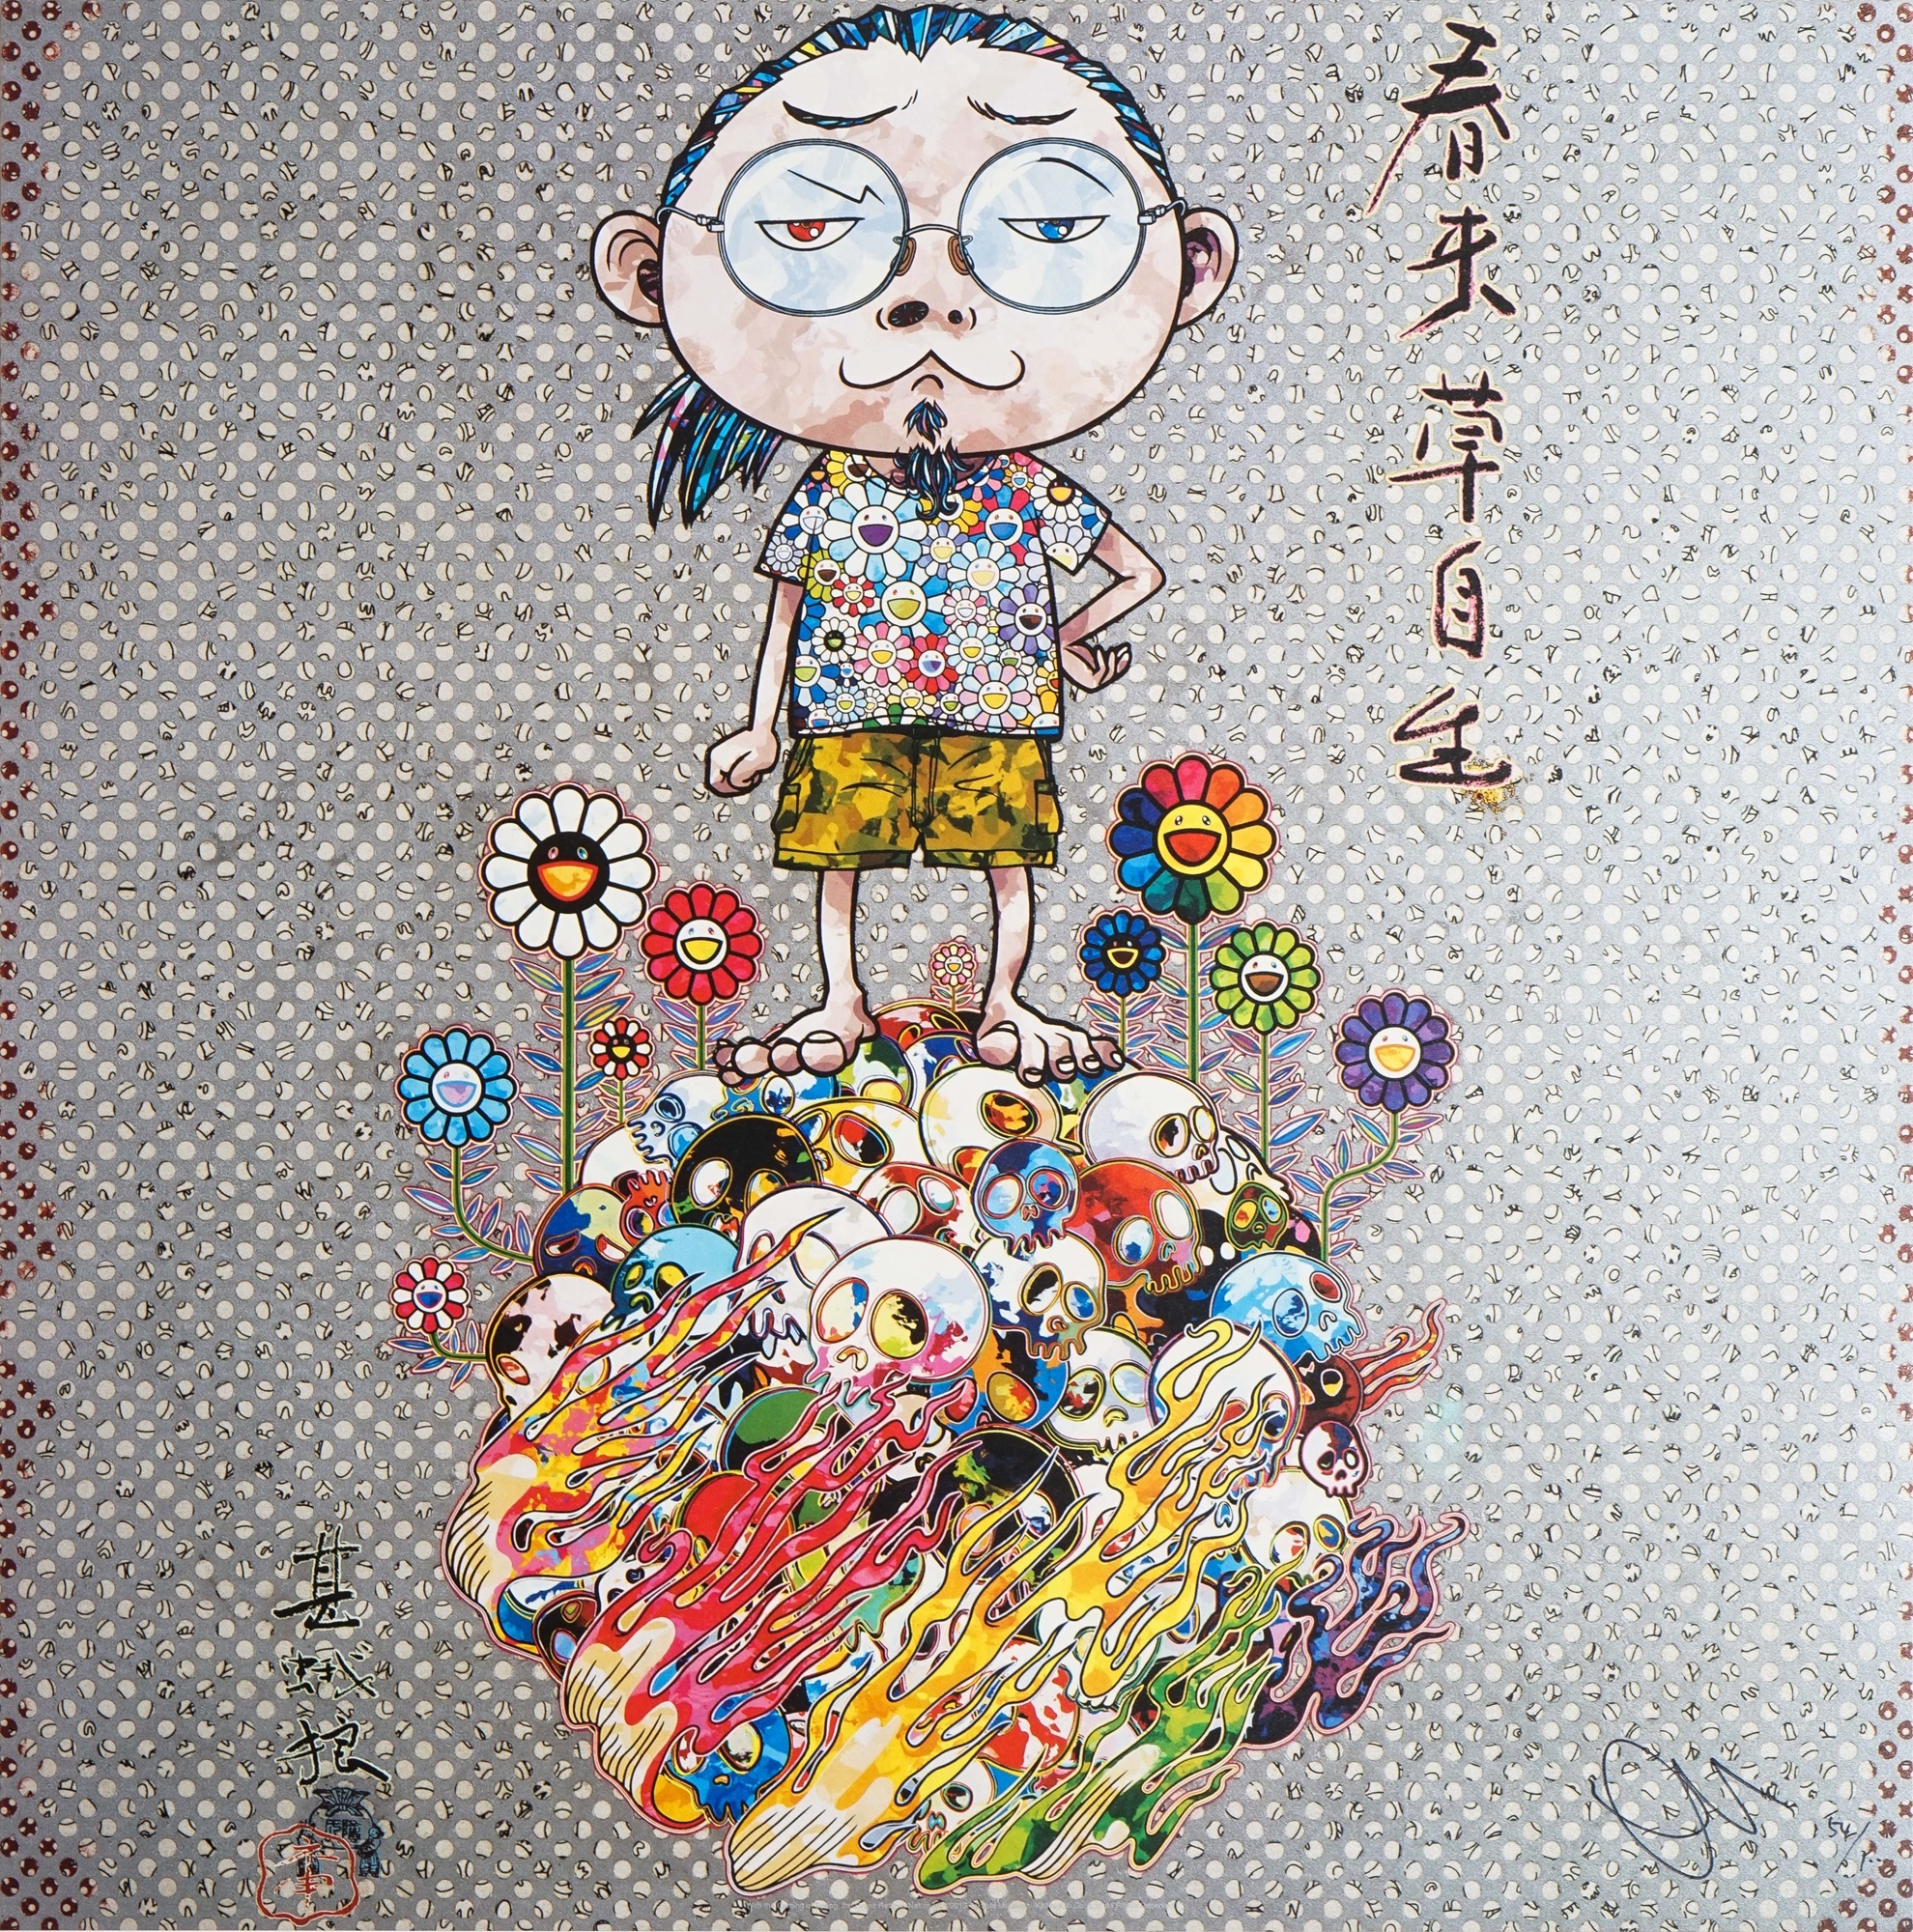 Takashi Murakami - MR. DOB COMES TO PLAY HIS FLUTE! for Sale